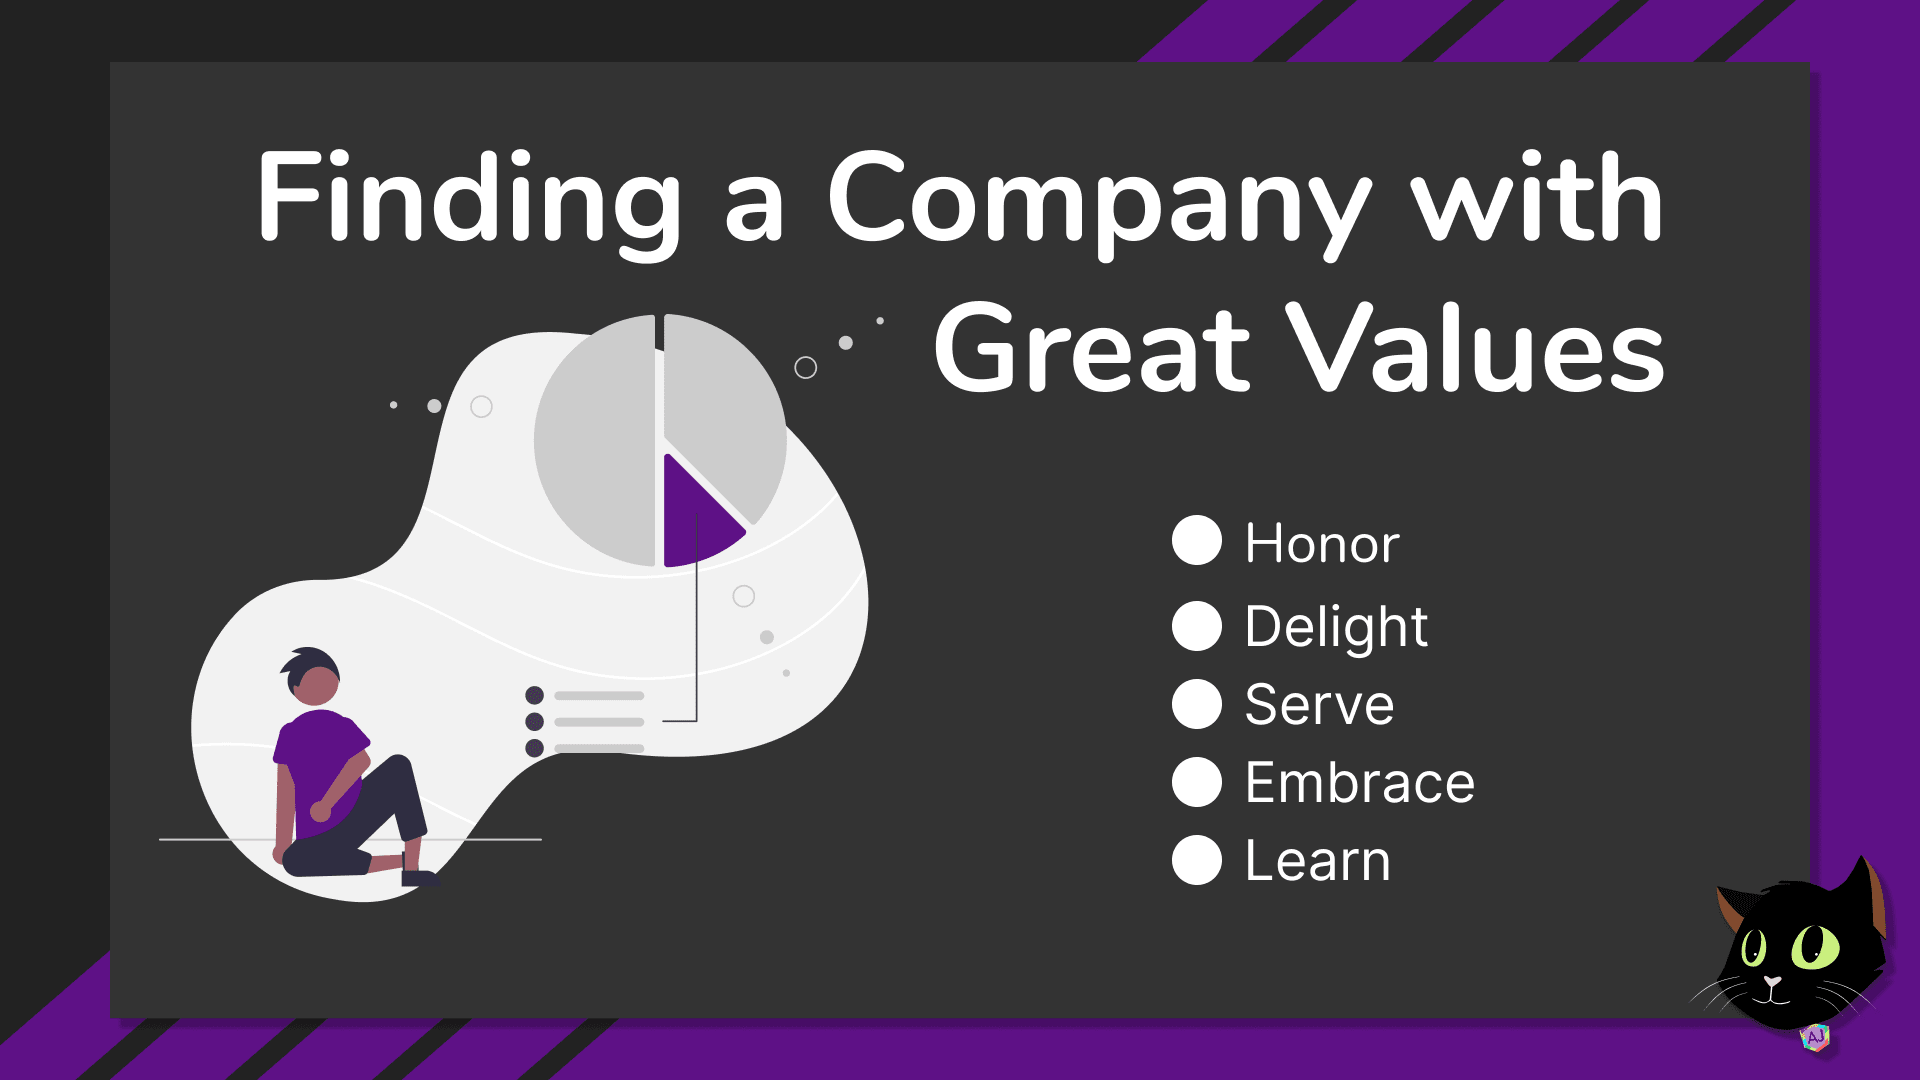 Finding a Company with Great Values